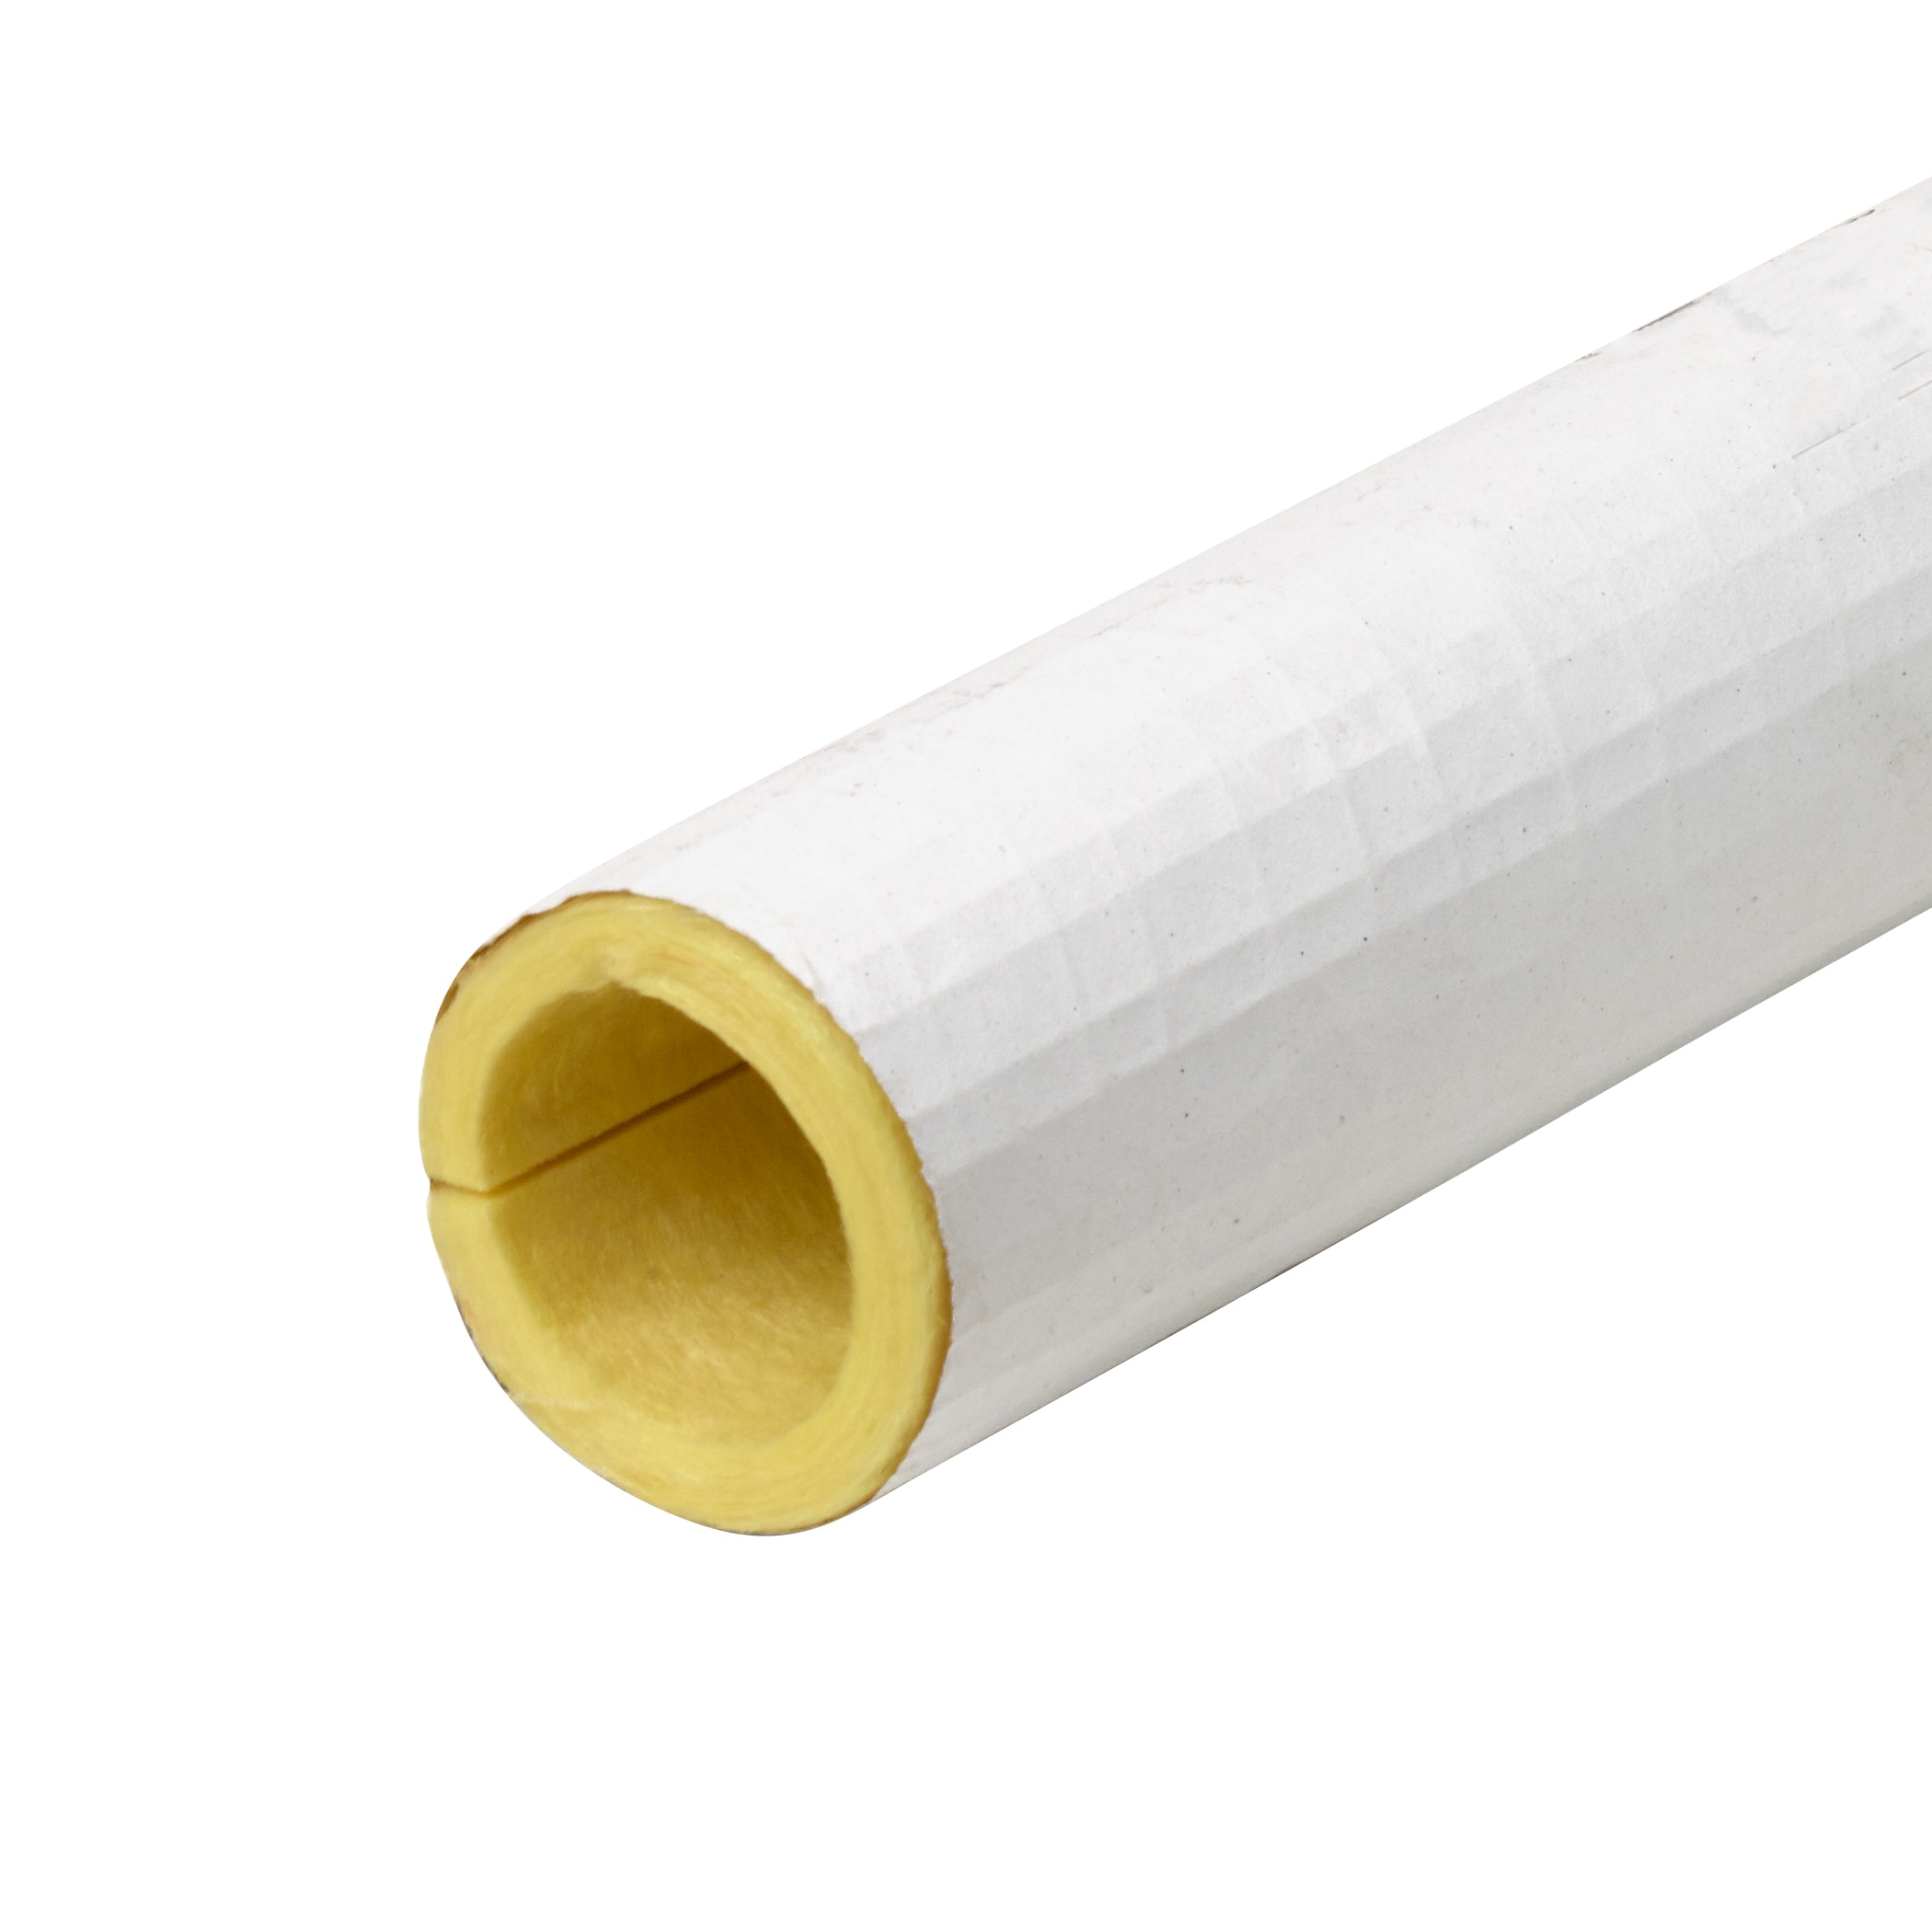 New Frost King PIPE WRAP Insulation Foil-Backed Fiberglass 3"x1"x25 rolls-Sealed 